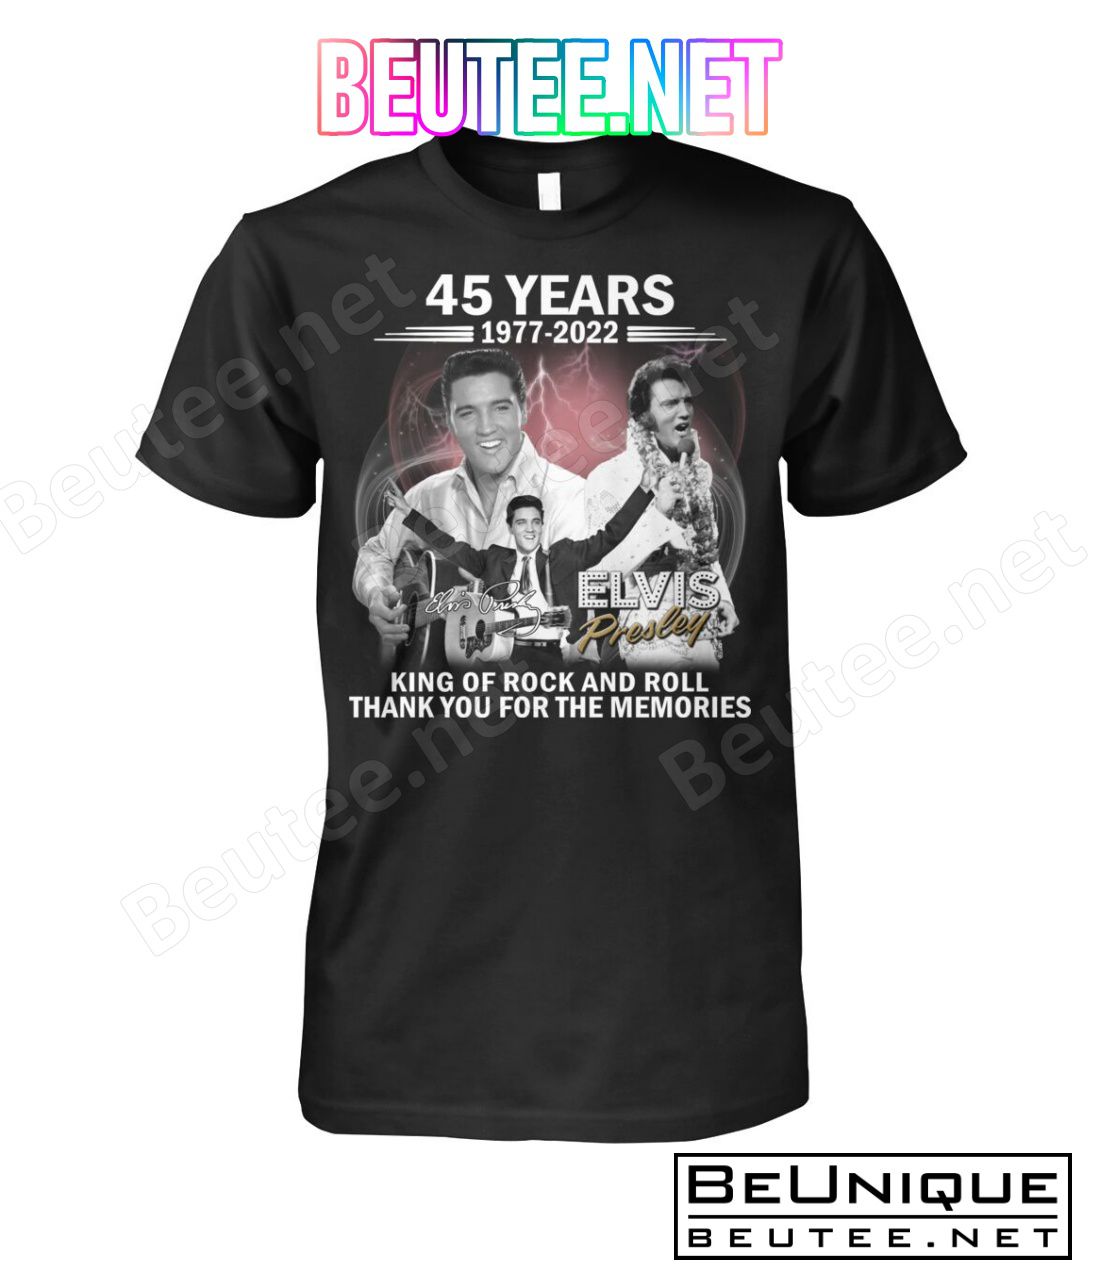 45 Years 1977-2022 Elvis Presley King Of Rock And Roll Thank You For The Memories Shirt